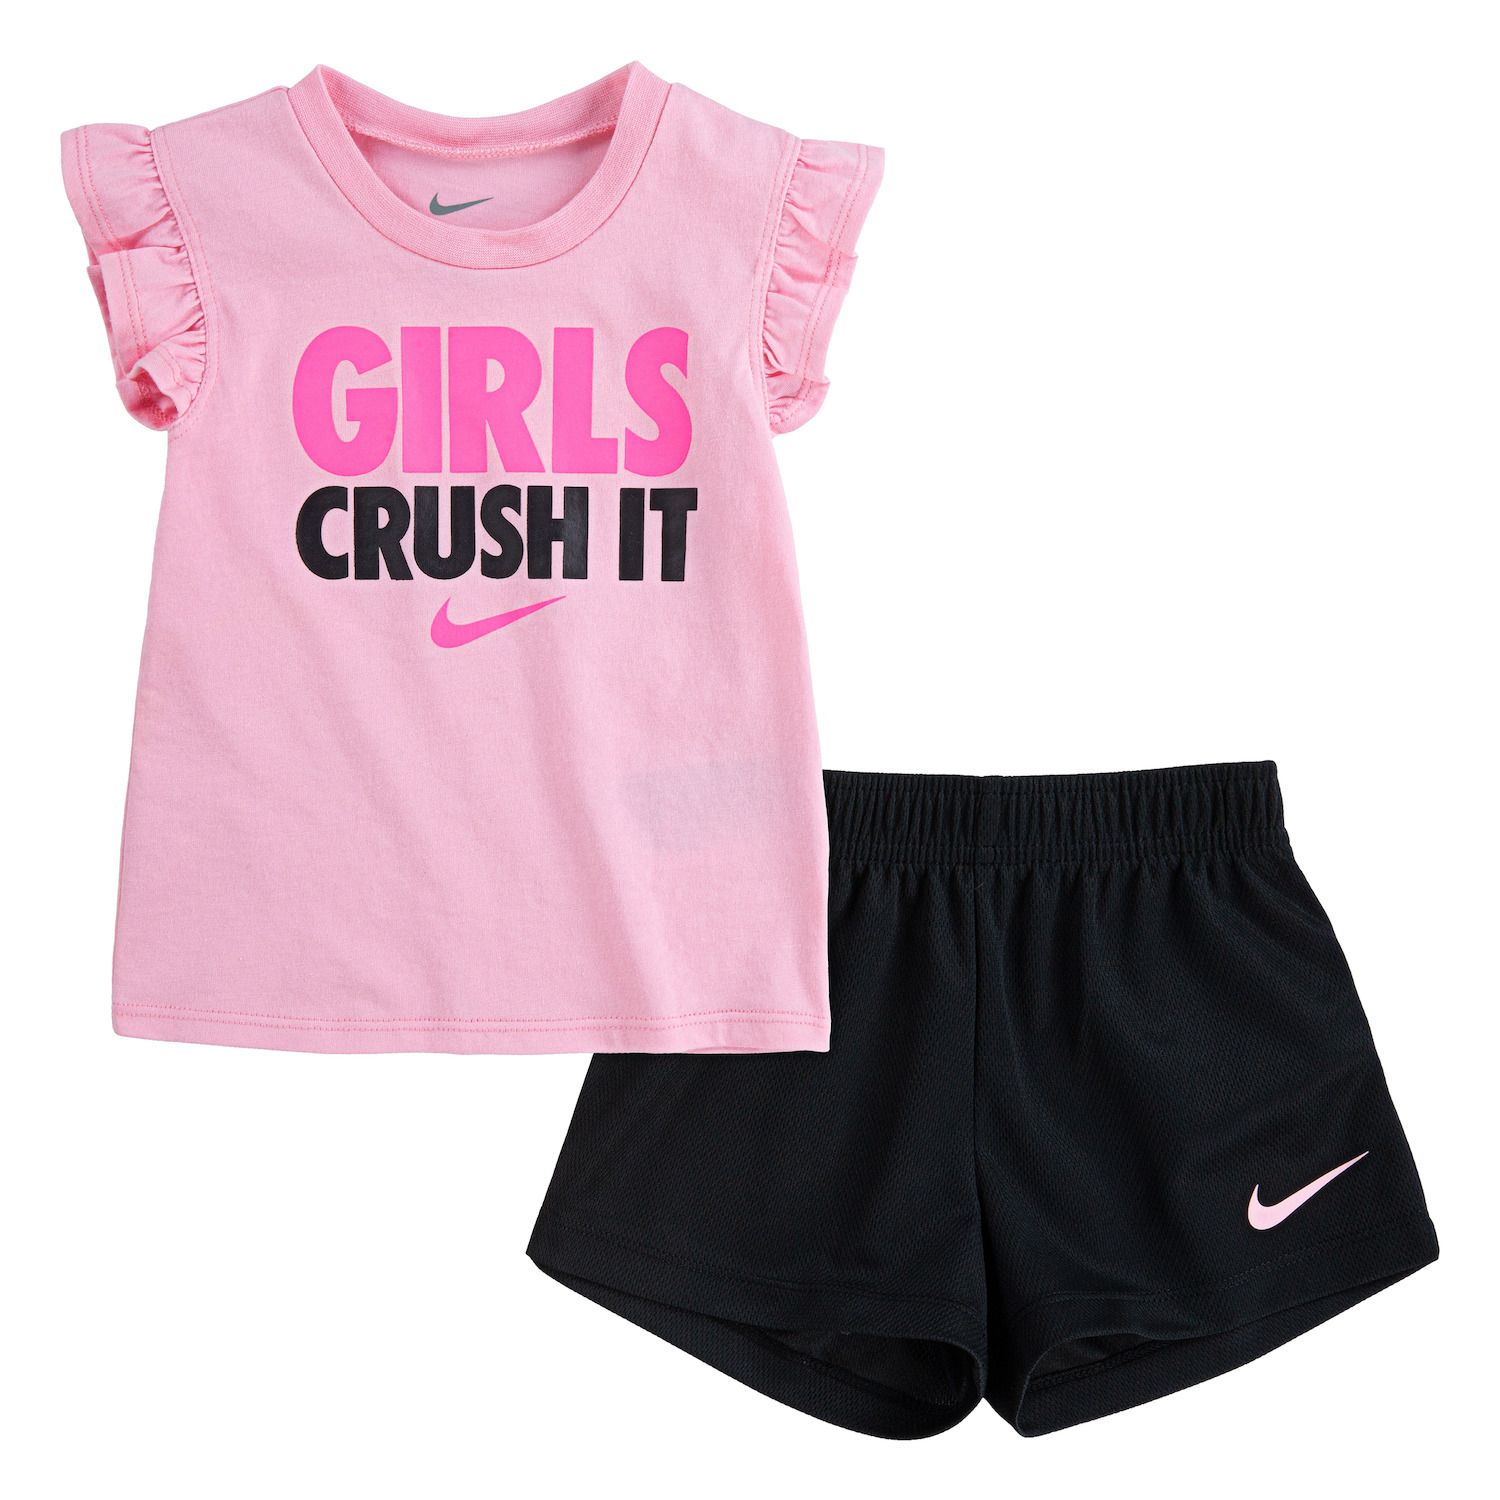 nike baby clothes girl